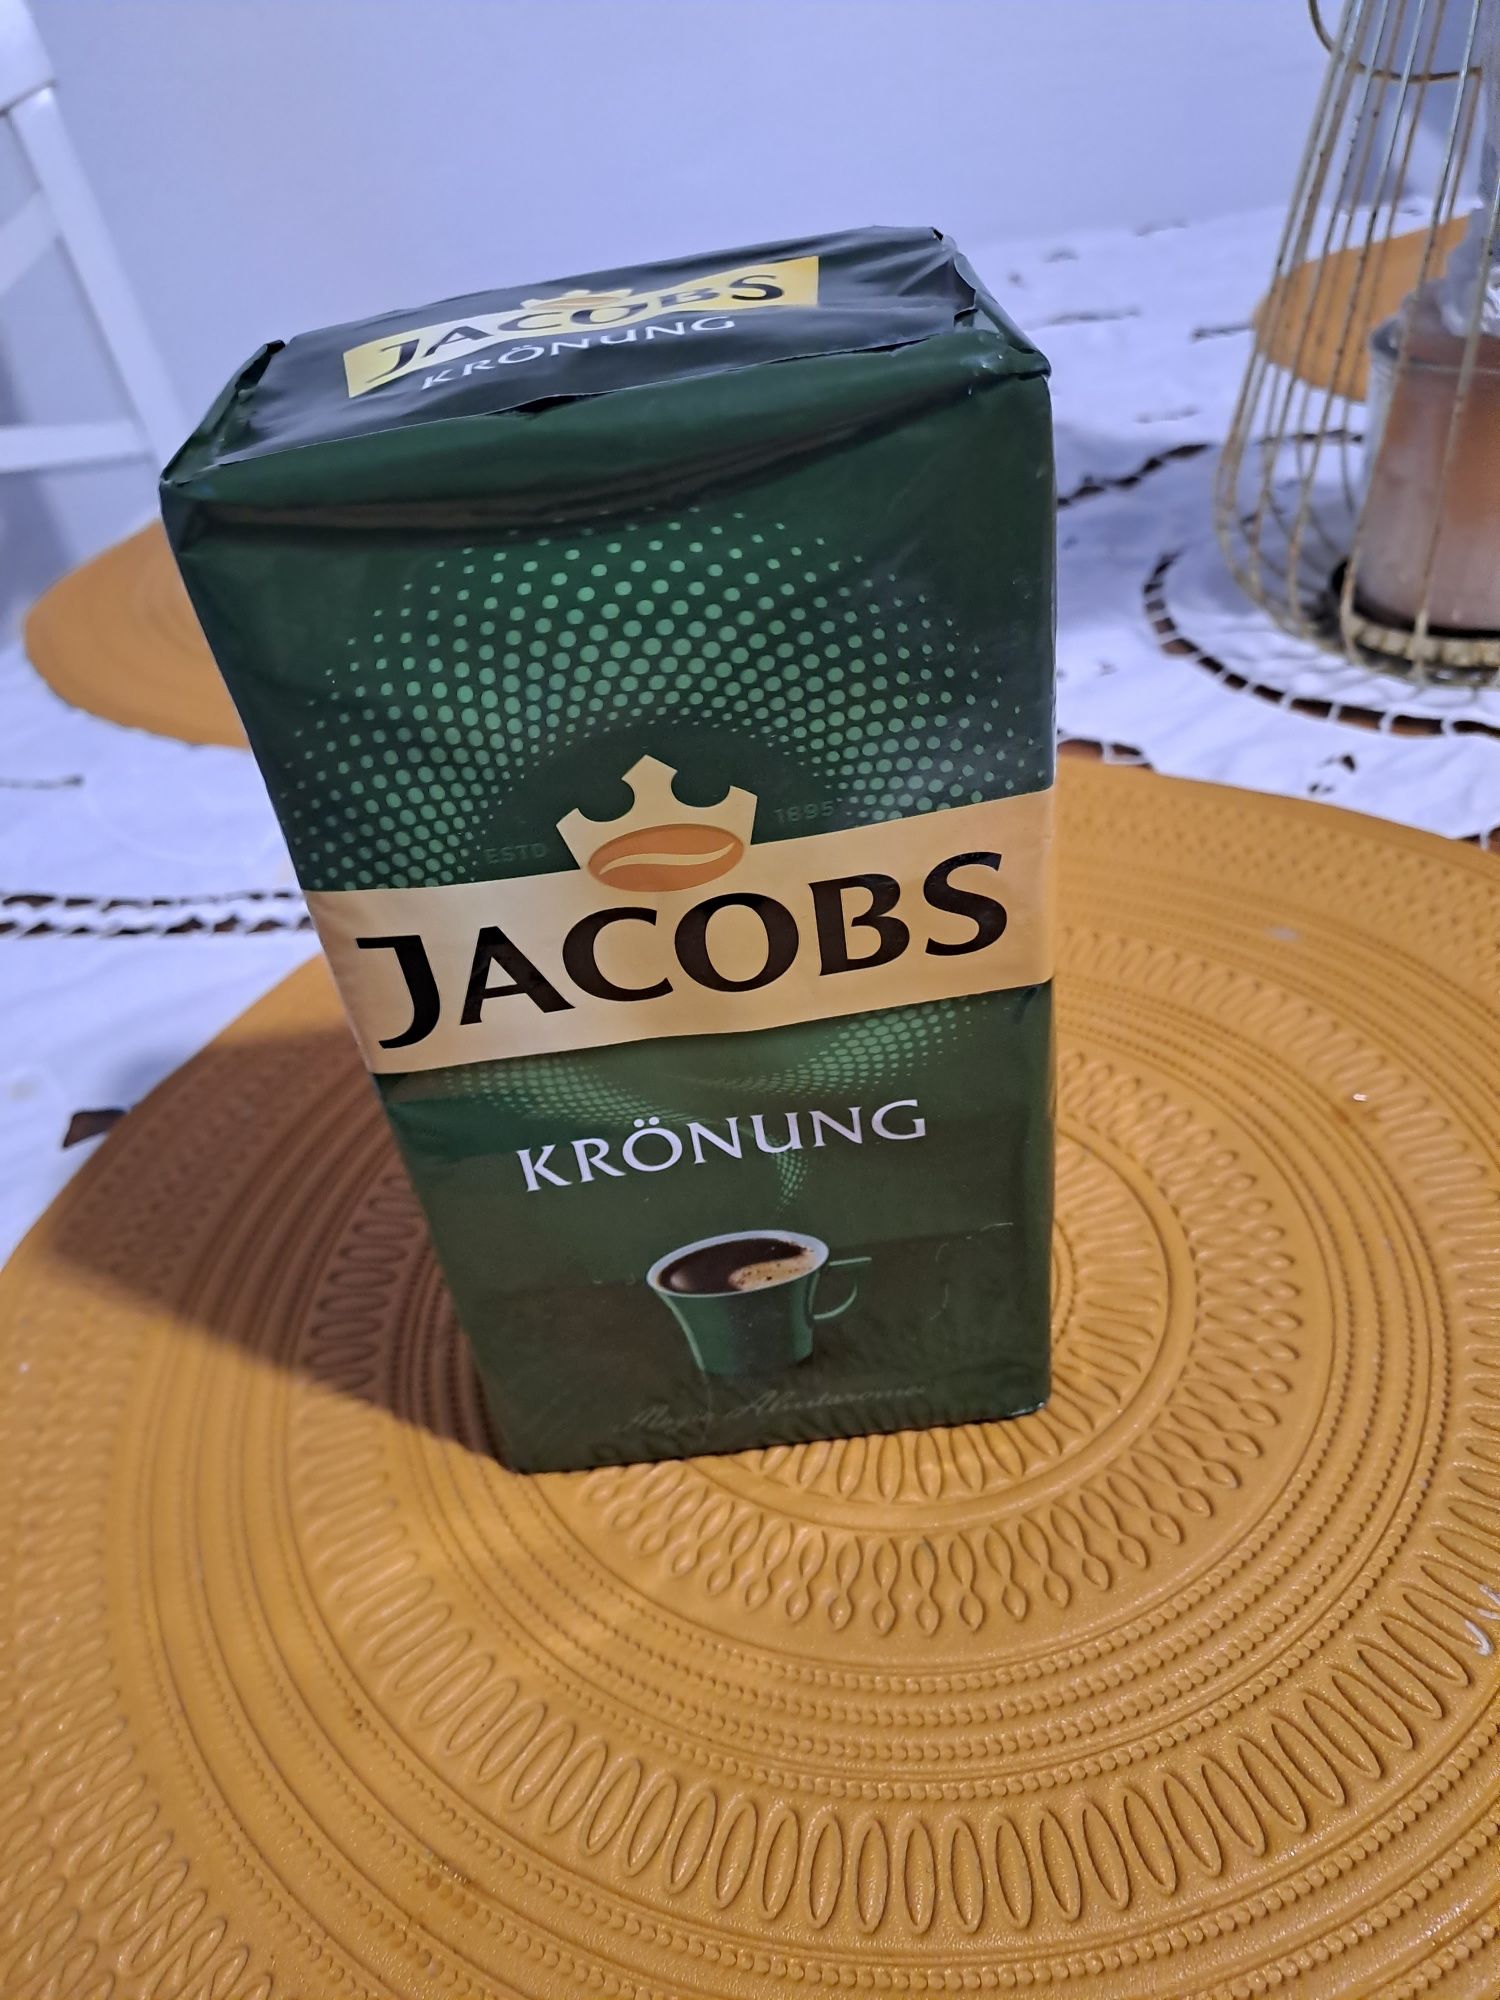 Vand cafea Iacobs kroung 500g